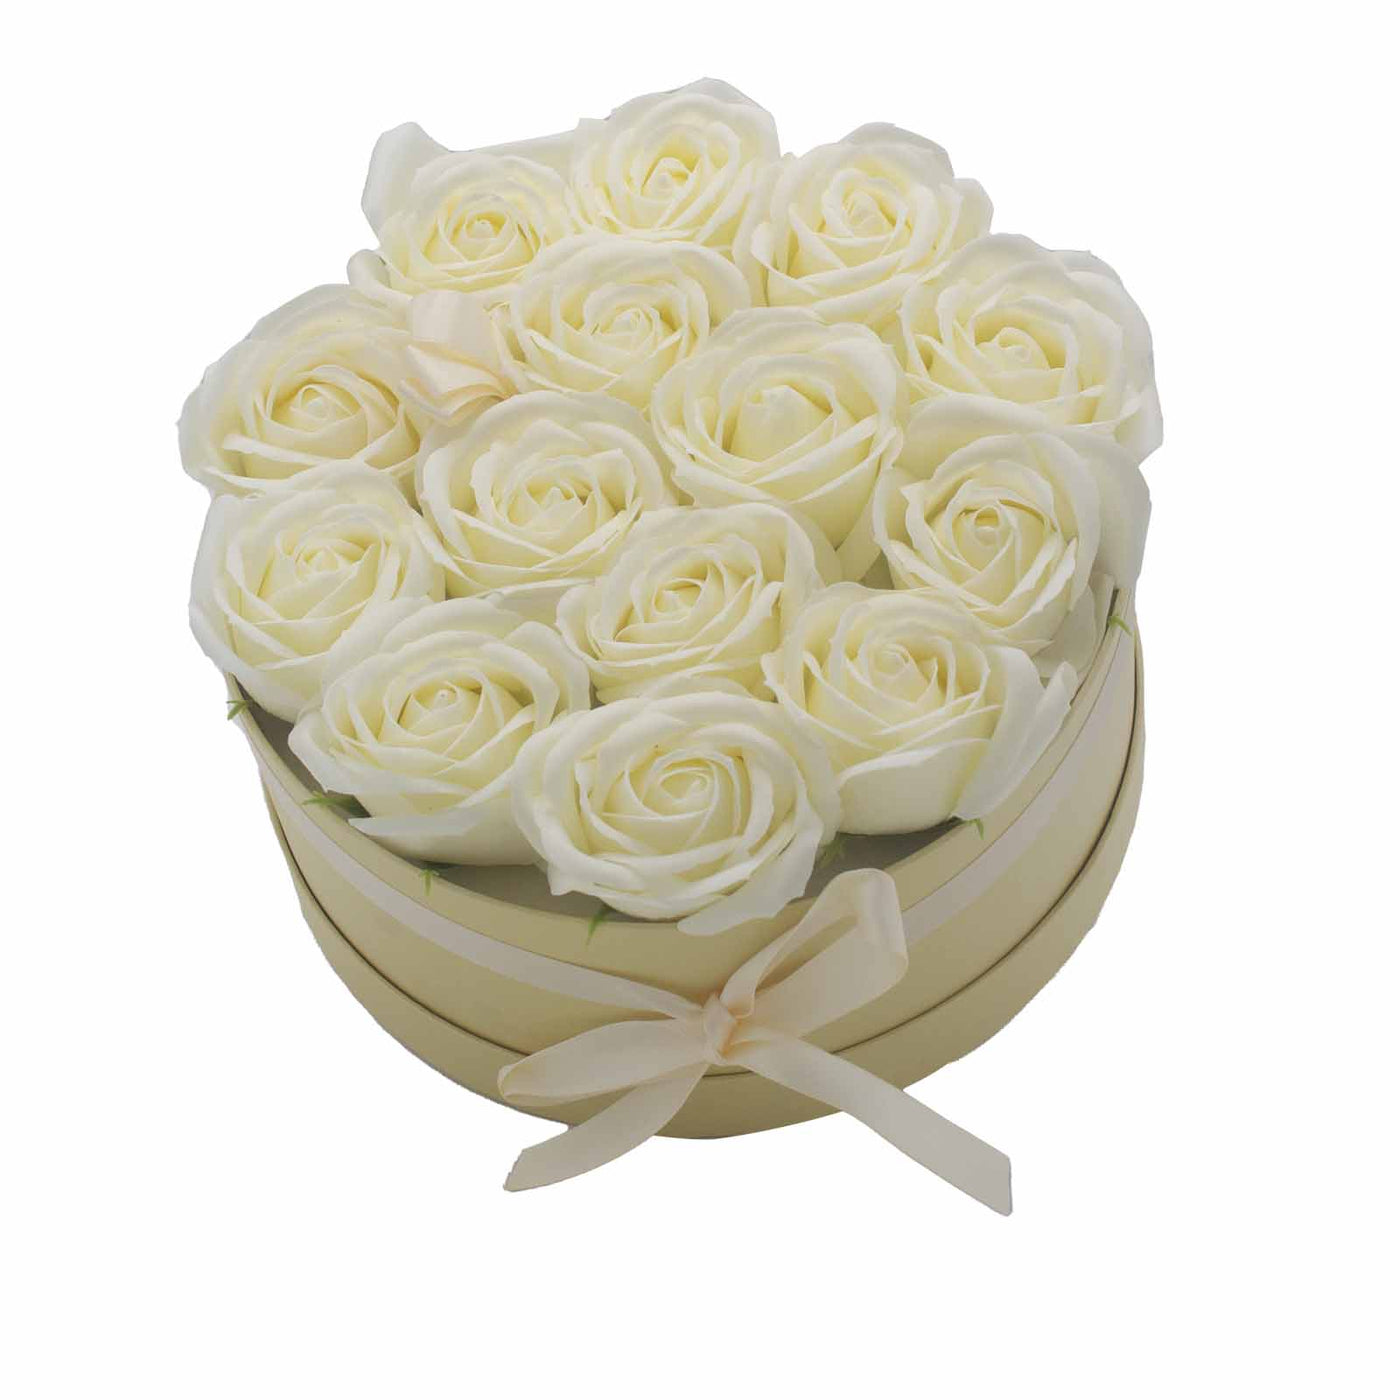 Body Soap Fragranced Flowers Gift Rose Bouquet - 14 Cream Roses In Round Gift Box.